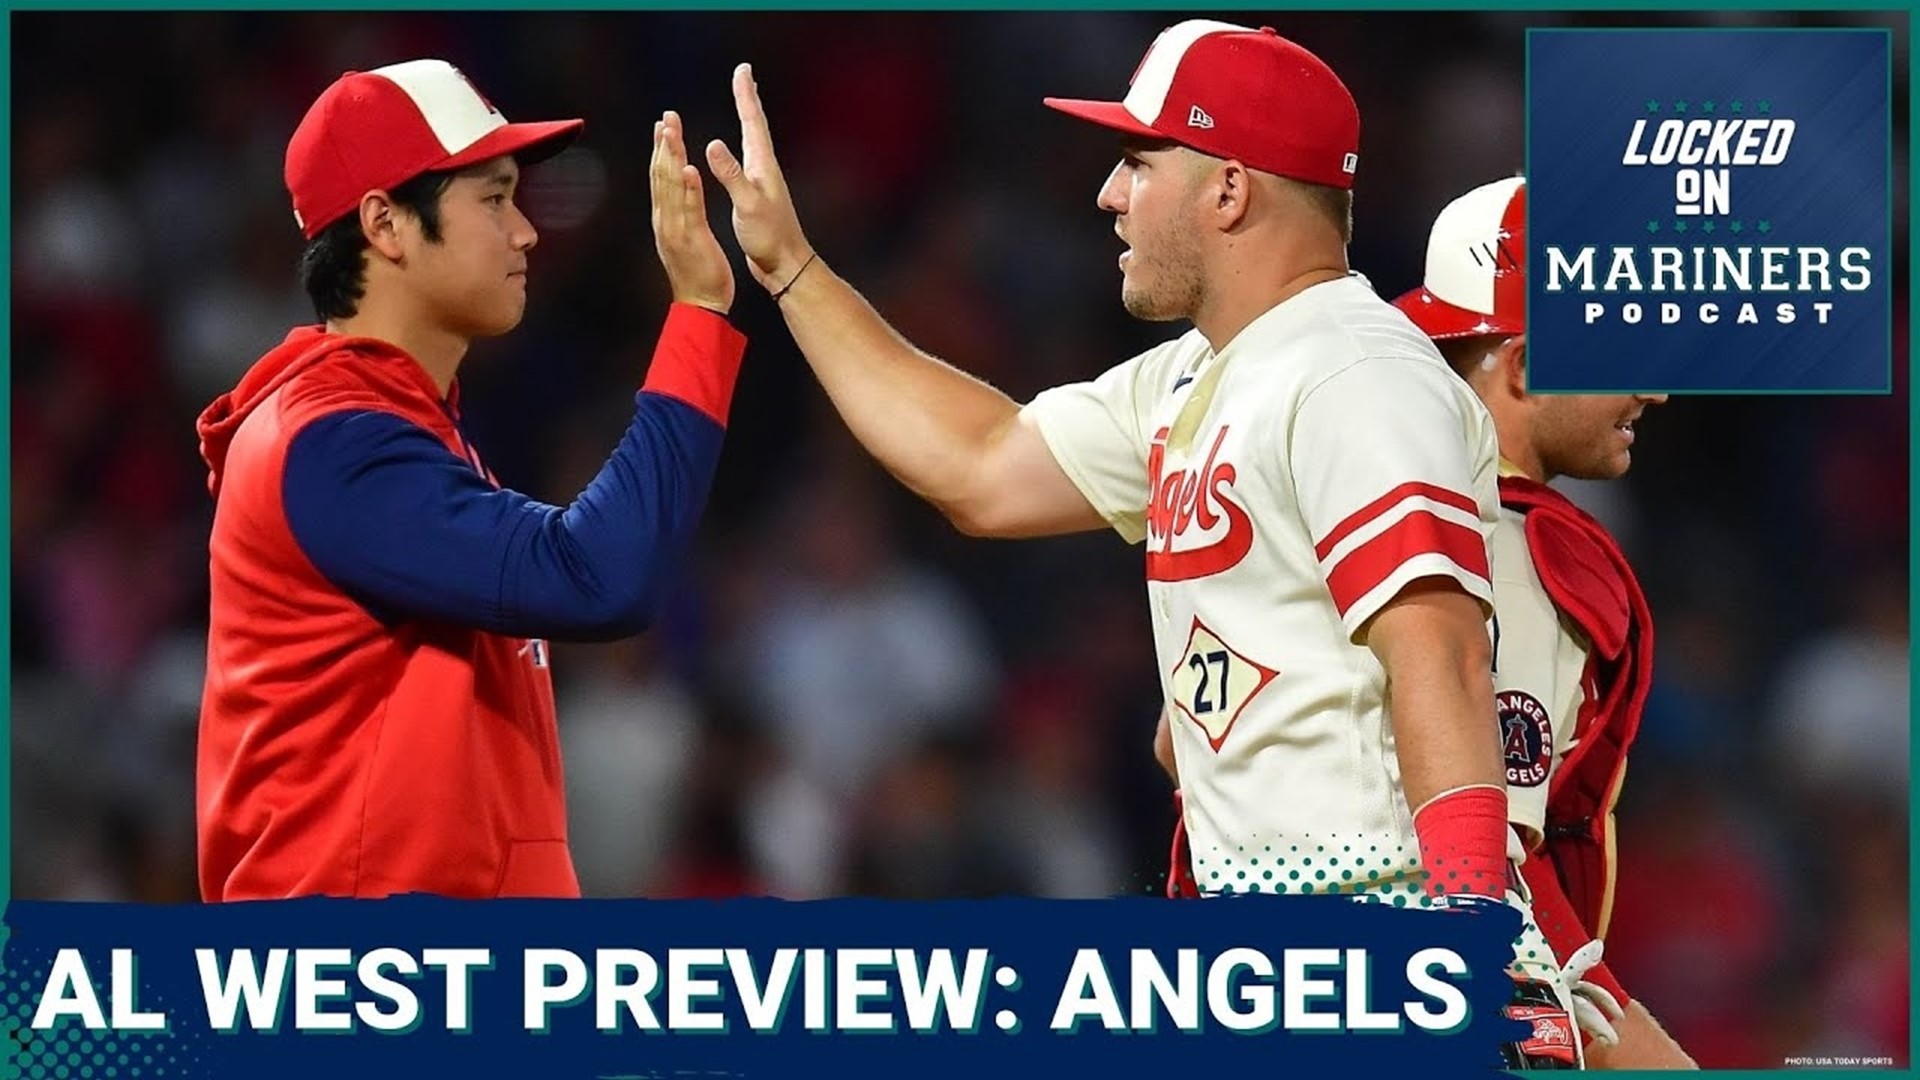 Colby and Ty discuss the dumpster fire of a baseball organization: the Los Angeles Angels of Anaheim. The Angels had a busy offseason, but did they get better?